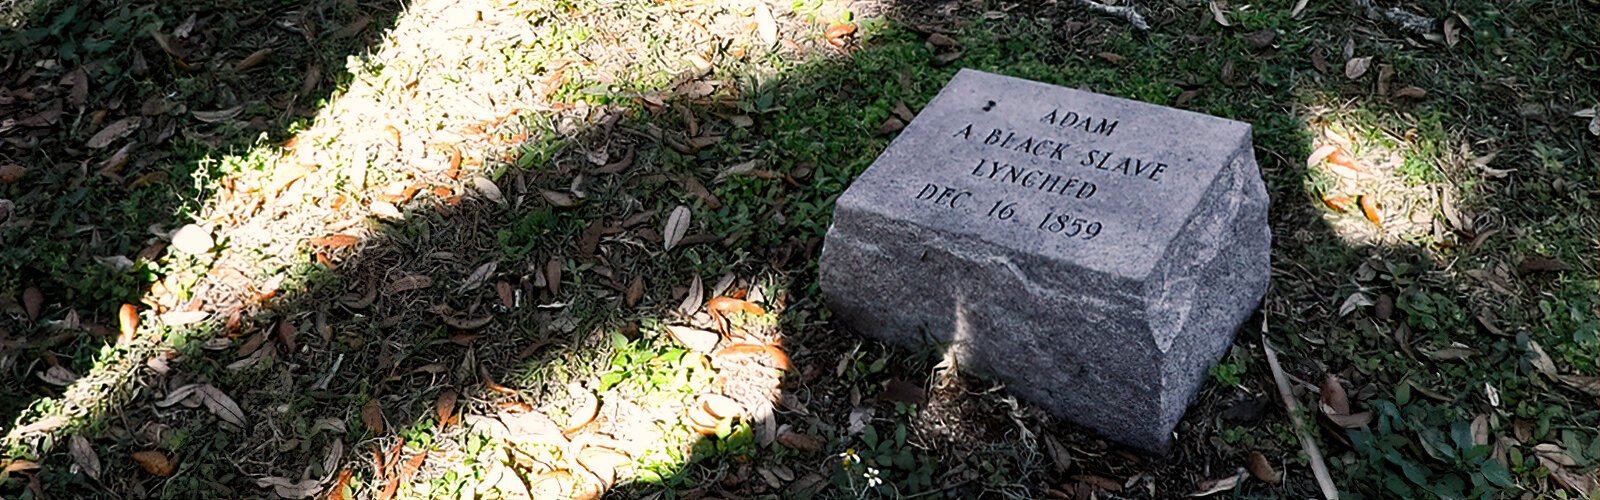 A simple stone marks the supposed burial site of Adam, a Black slave lynched by a mob in 1859 after he had been acquitted of the murder of a white man that he did not commit.